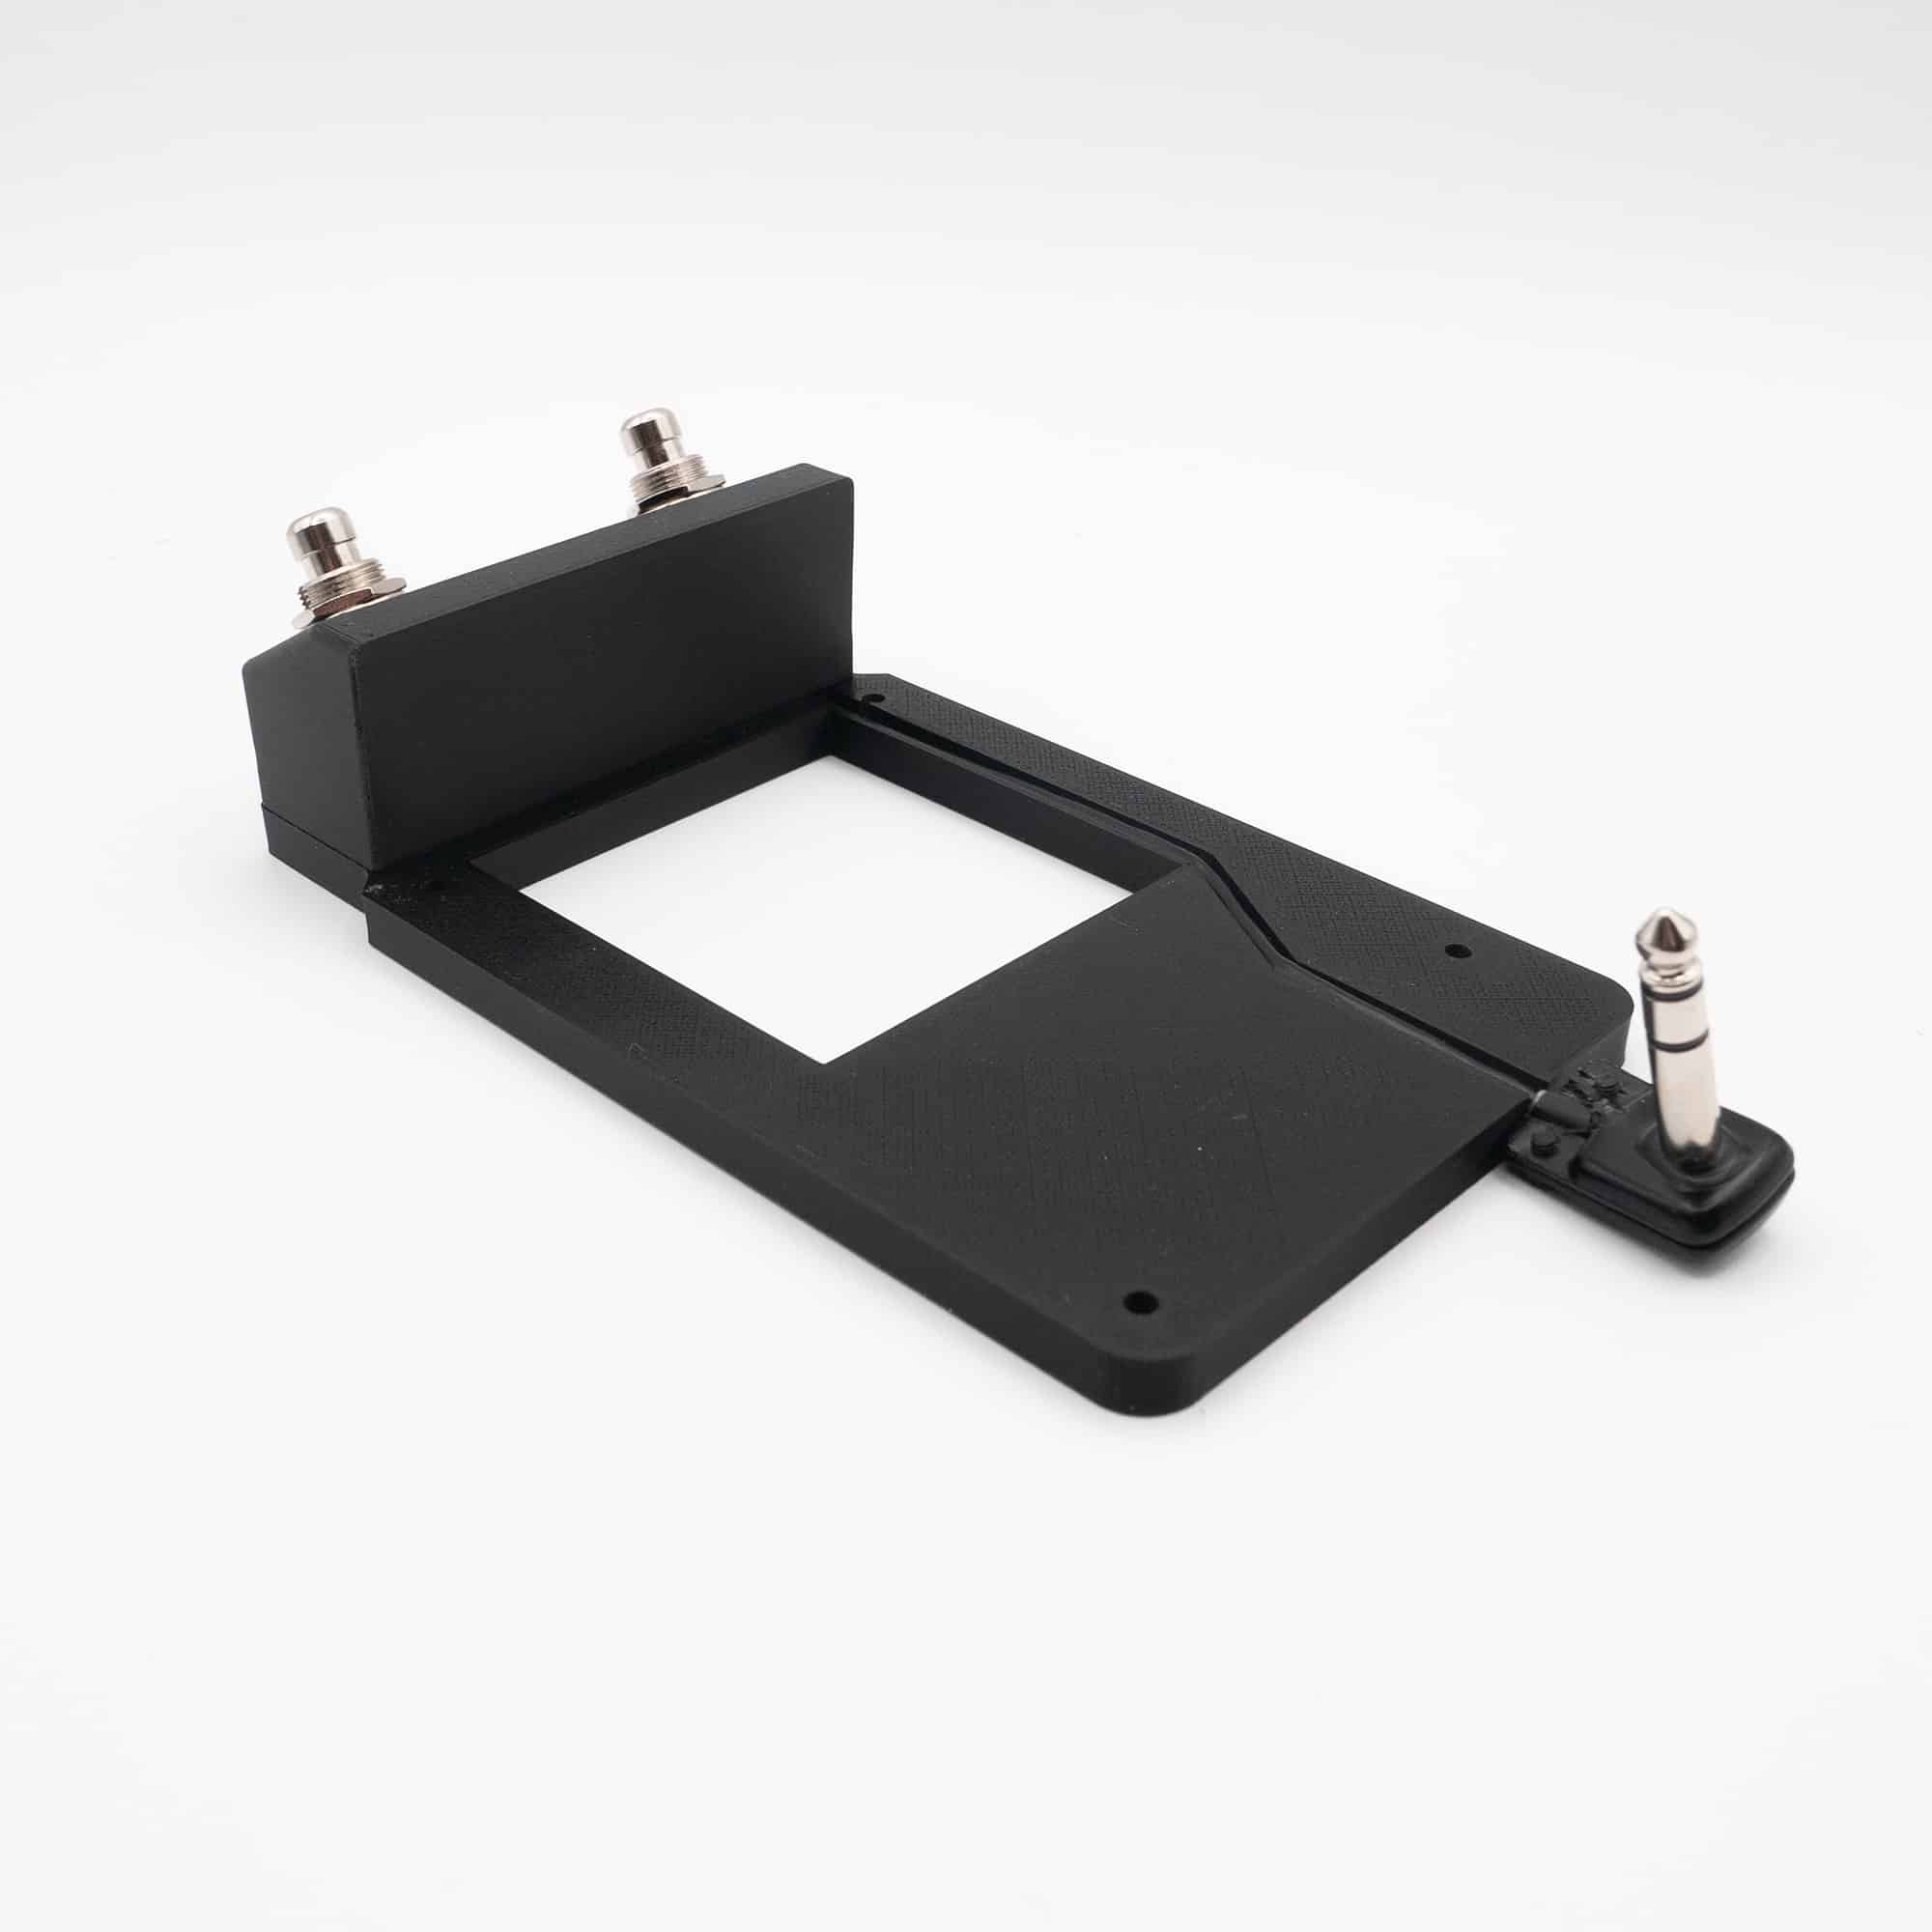 Pedalnetics PodExpress AuxPlate with built in jack